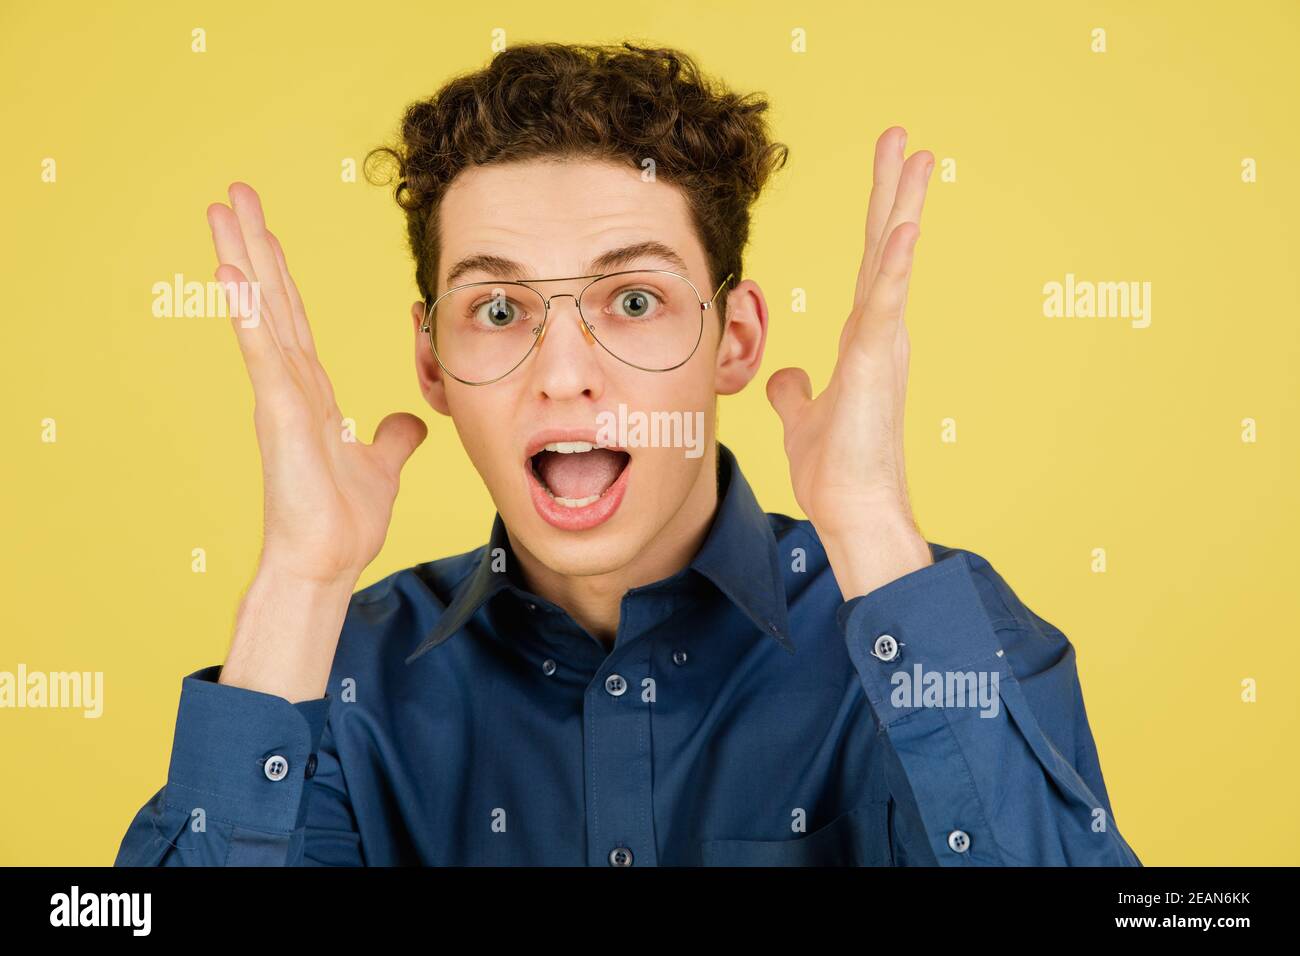 Astonished. Caucasian handsome man's portrait isolated on yellow studio background with copyspace. Male model with eyewear. Concept of human emotions, facial expression, sales, ad, fashion. Stock Photo